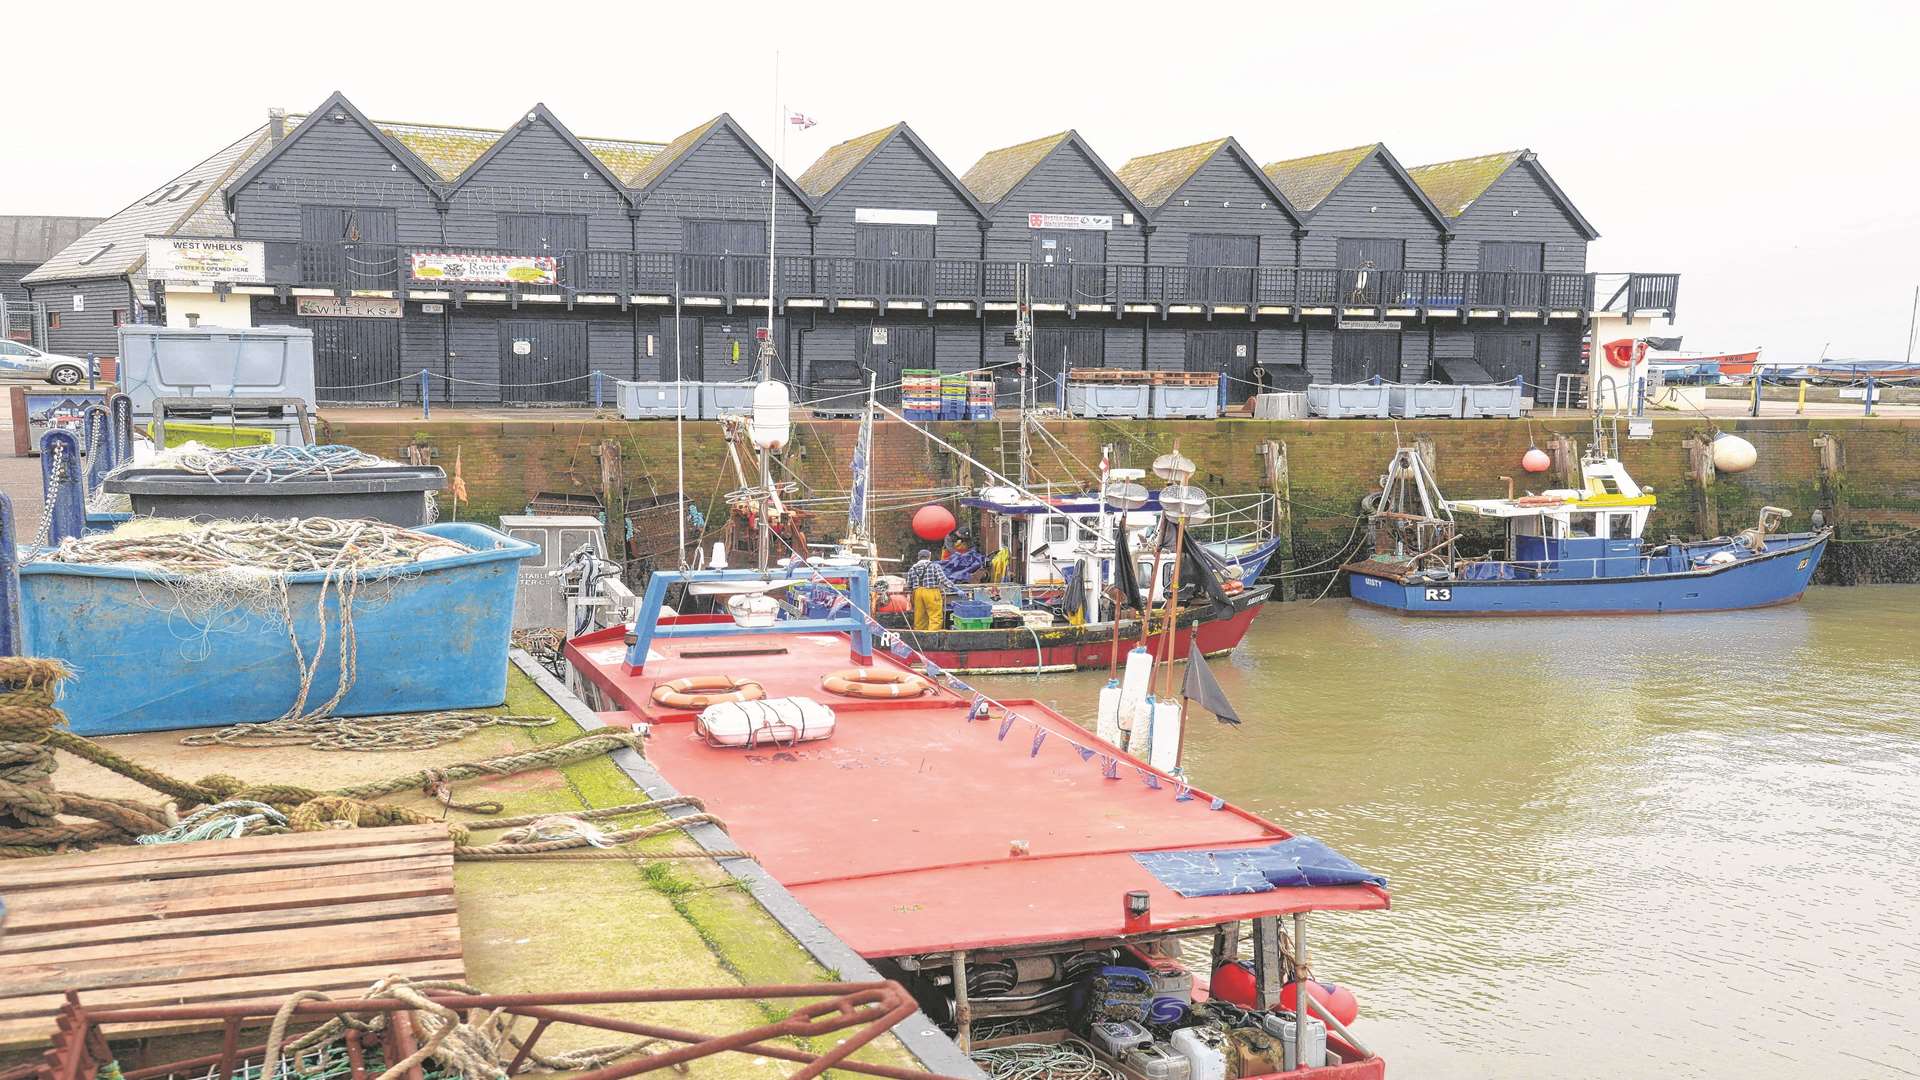 Whitstable harbour